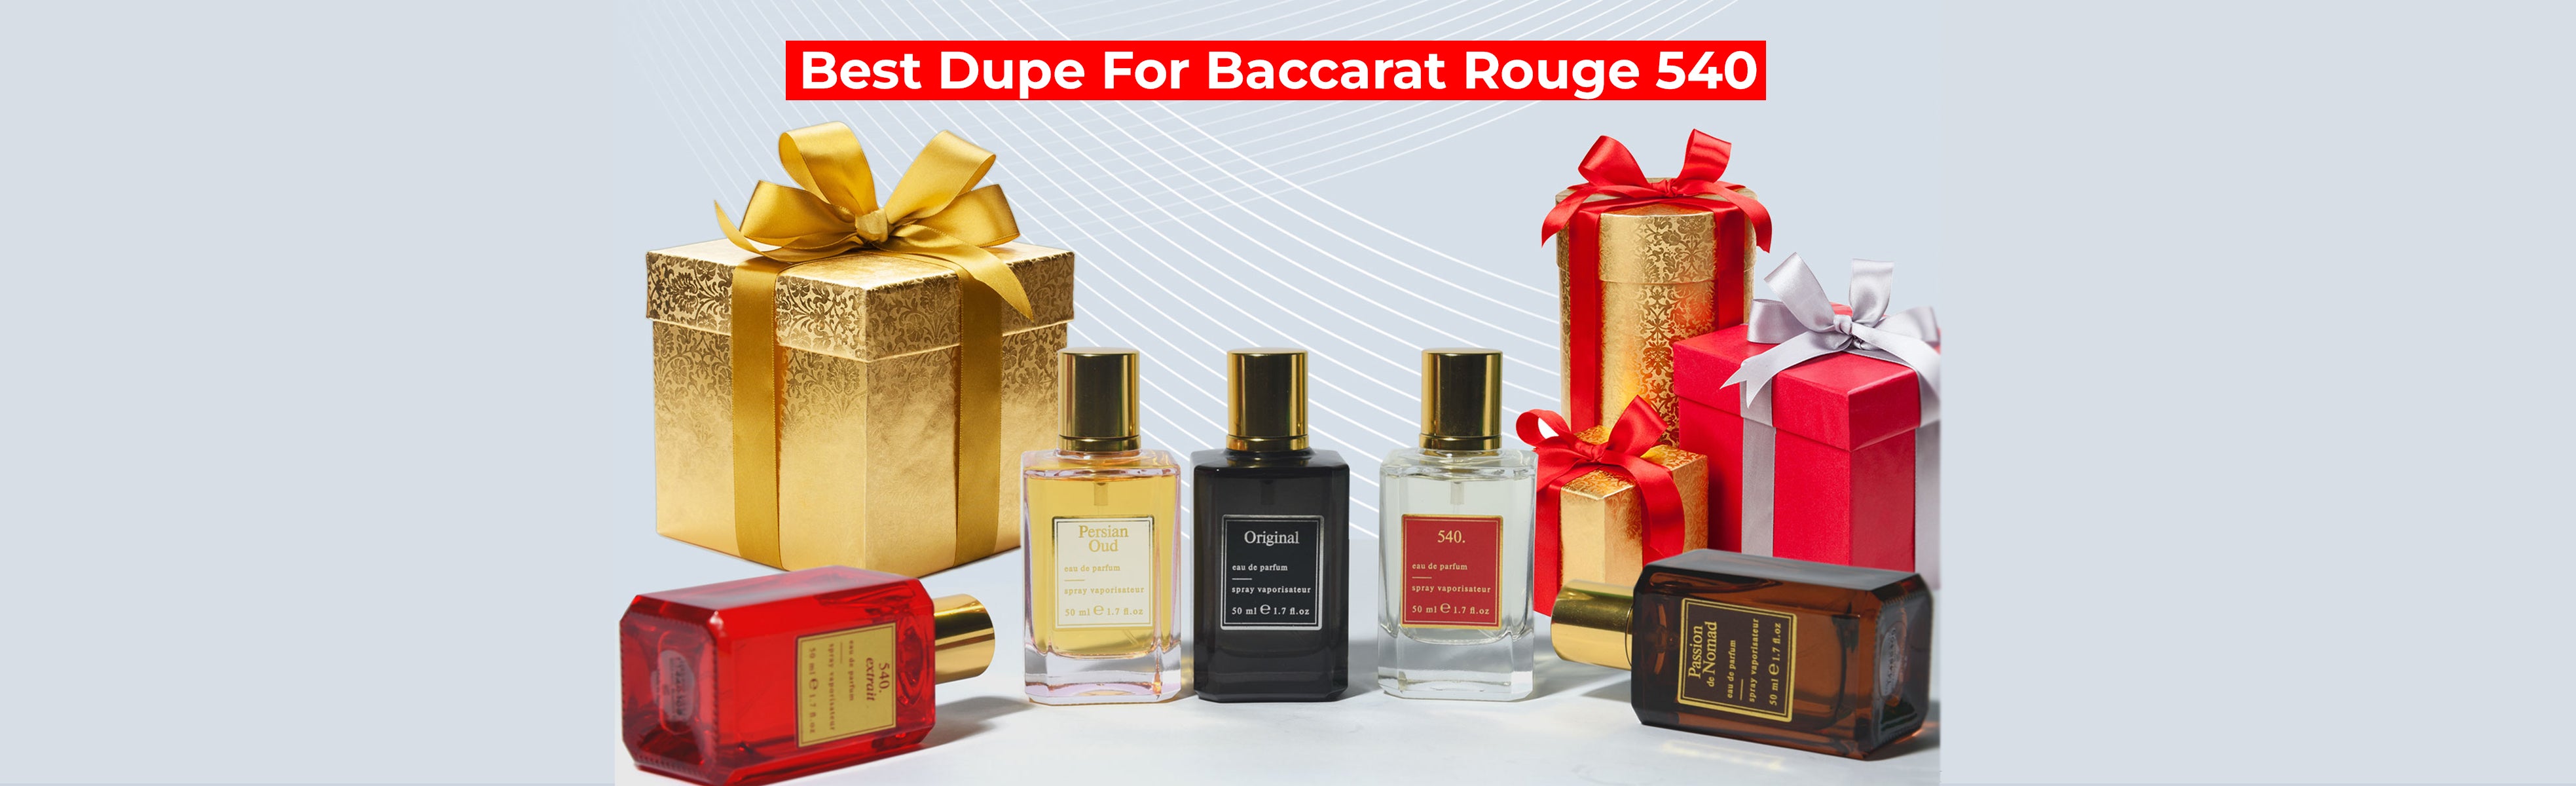 What is the Best Dupe For Baccarat Rouge 540